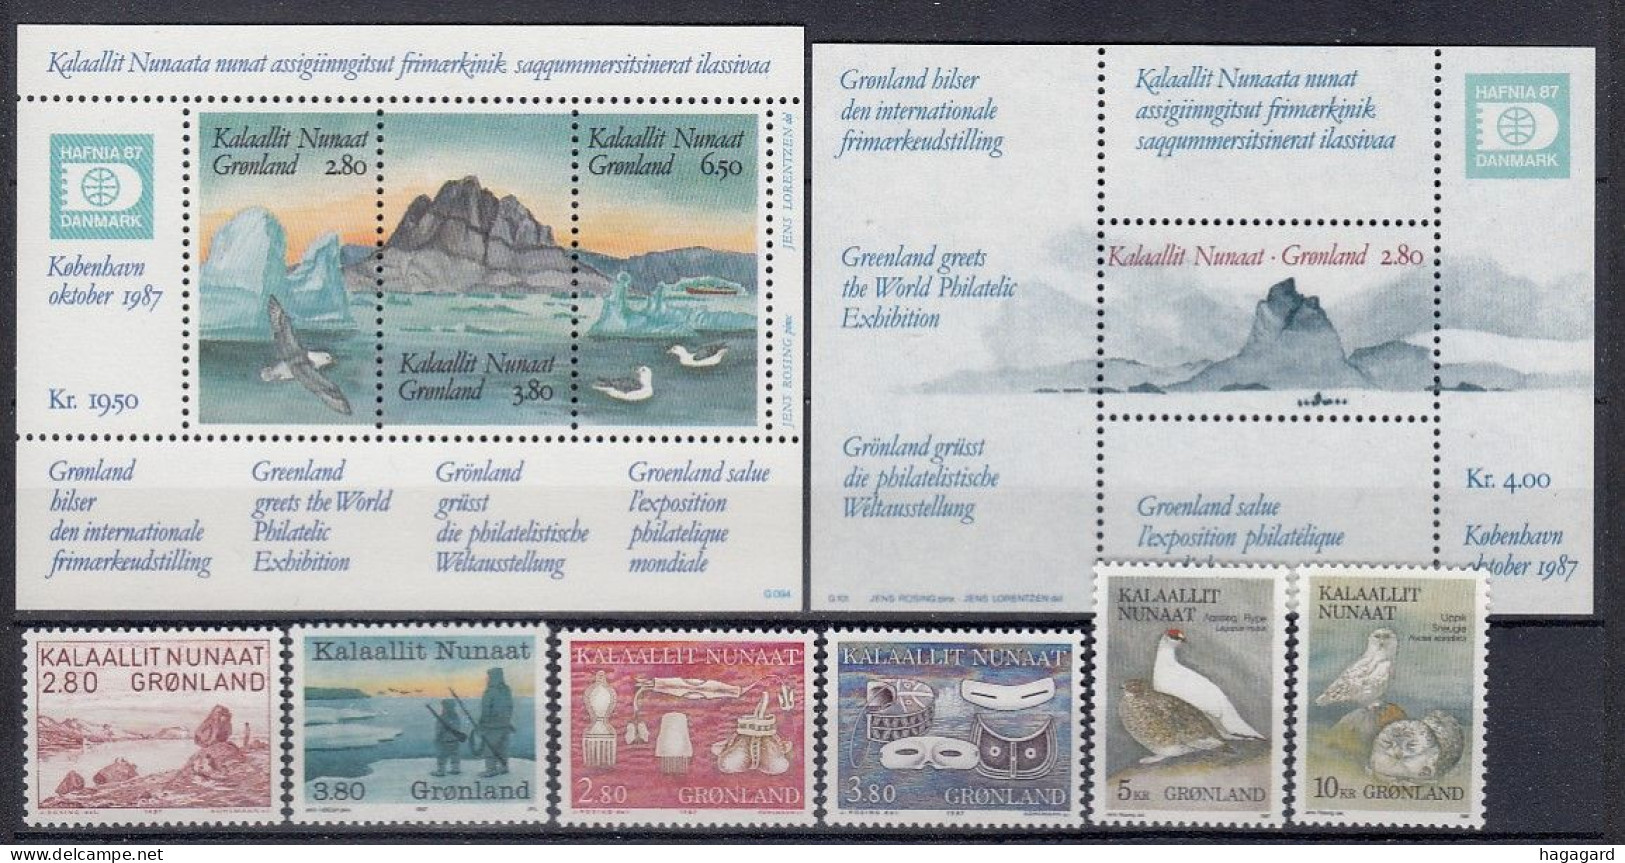 G2679. Greenland 1987. Complete Year Set. Michel 169-78. (20.20€). MNH(**) - Annate Complete